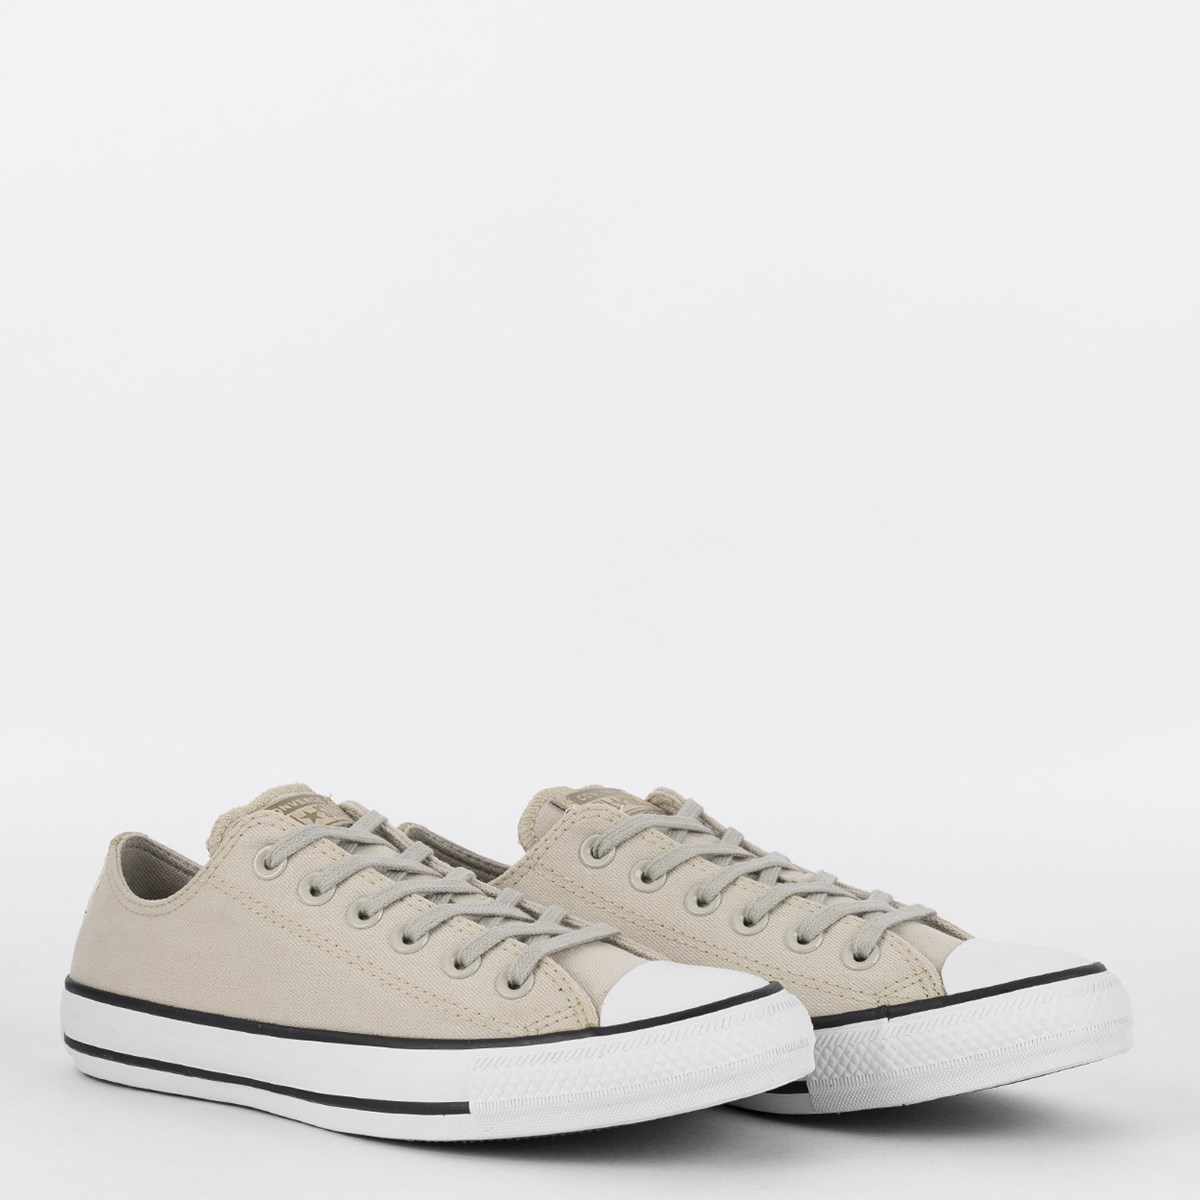 Tênis Converse All Star Chuck Taylor Ox Authentic Glam Bege